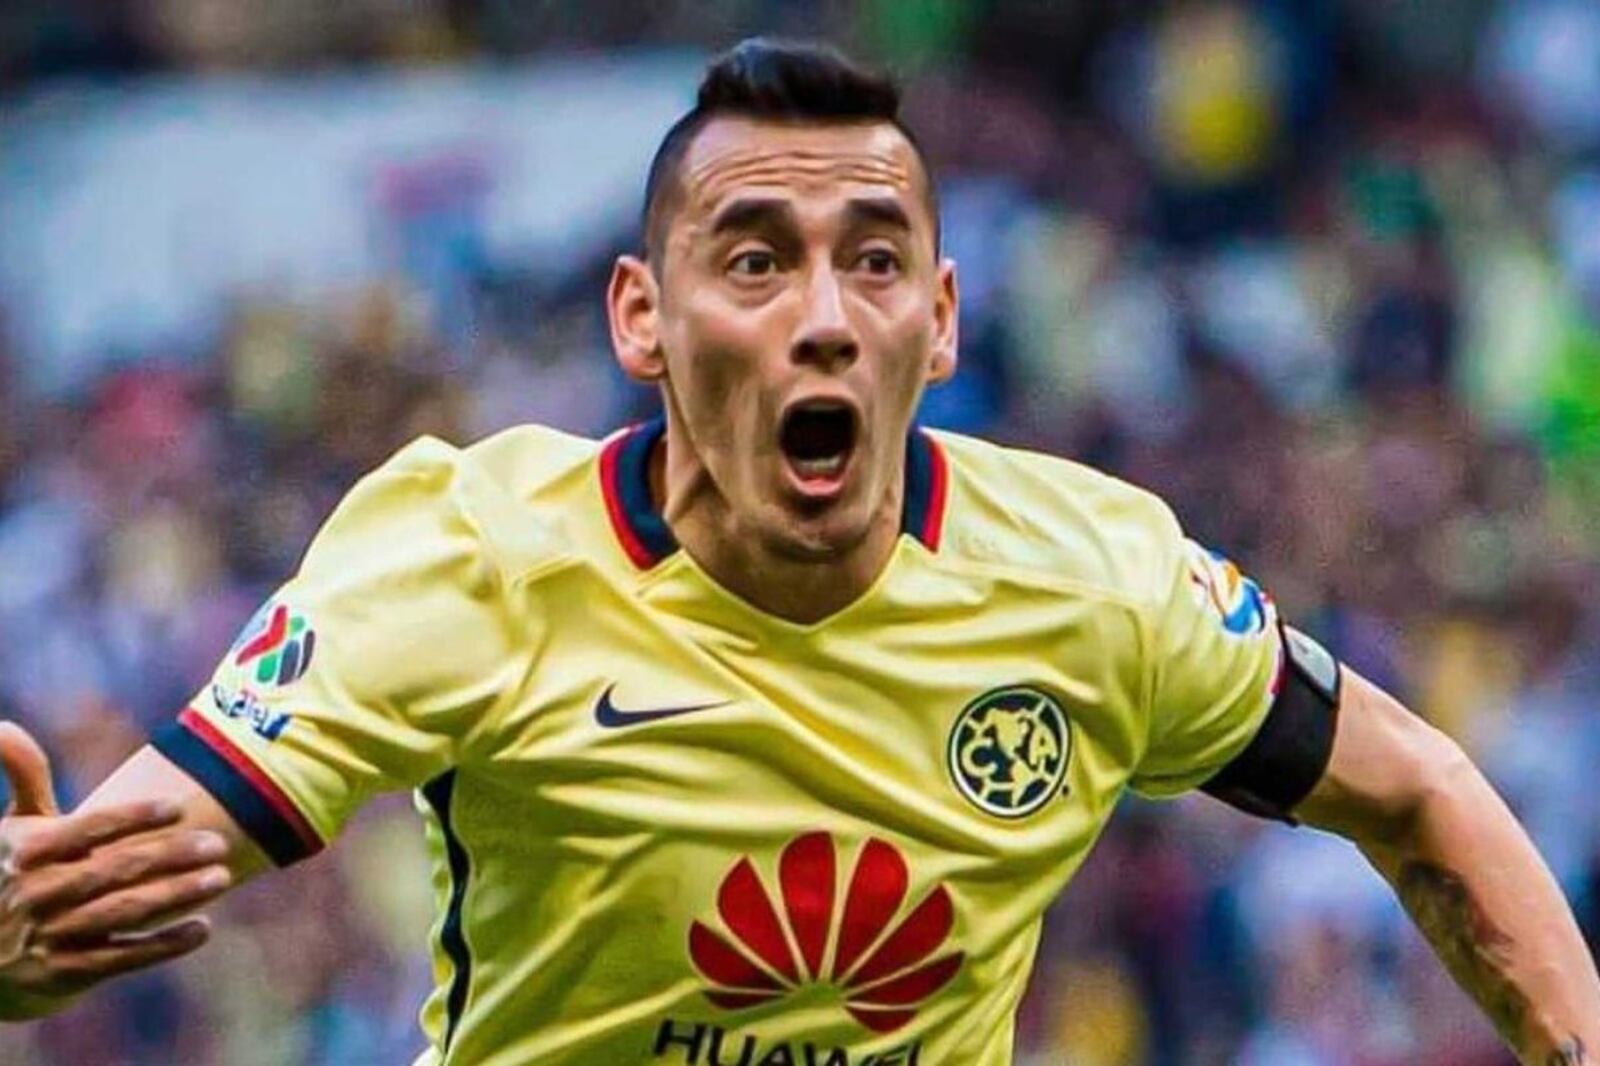 Rubens Sambueza's message that excites the fans of Club América